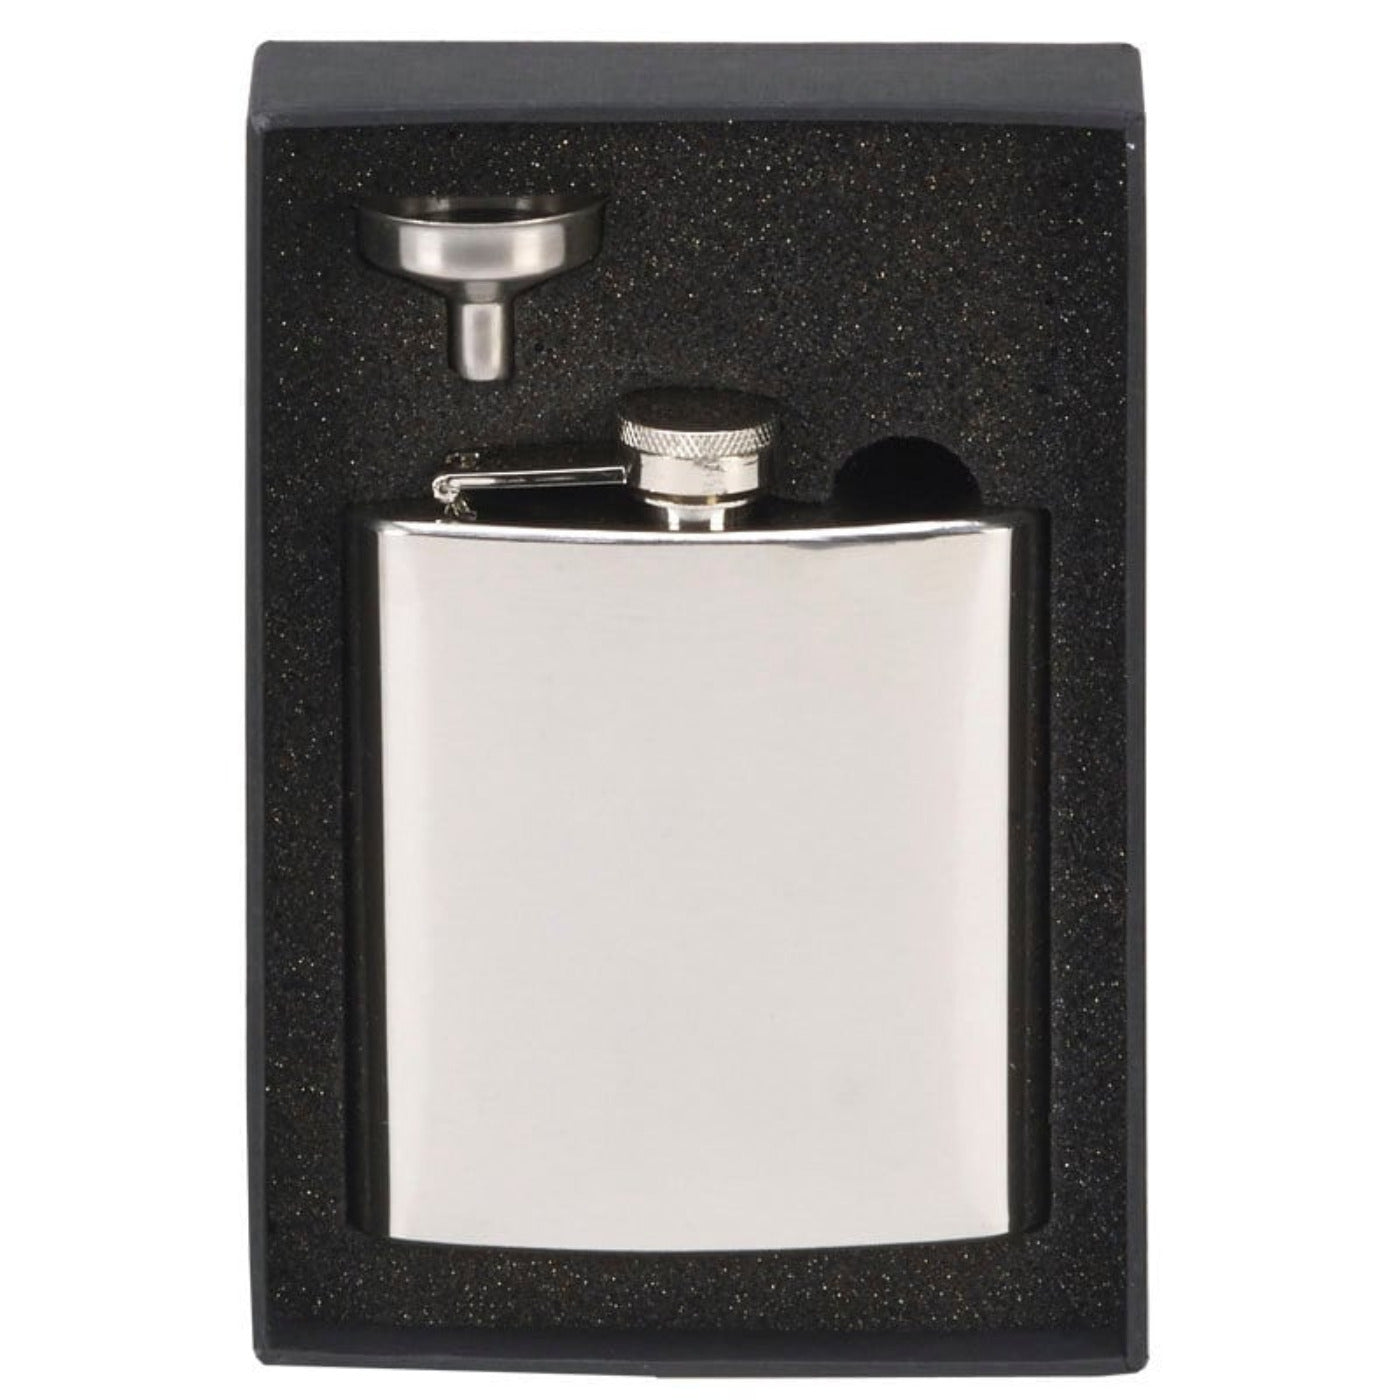 Personalised Wedding Hip Flask - Father Of The Bride, Groom, Usher, Best Man